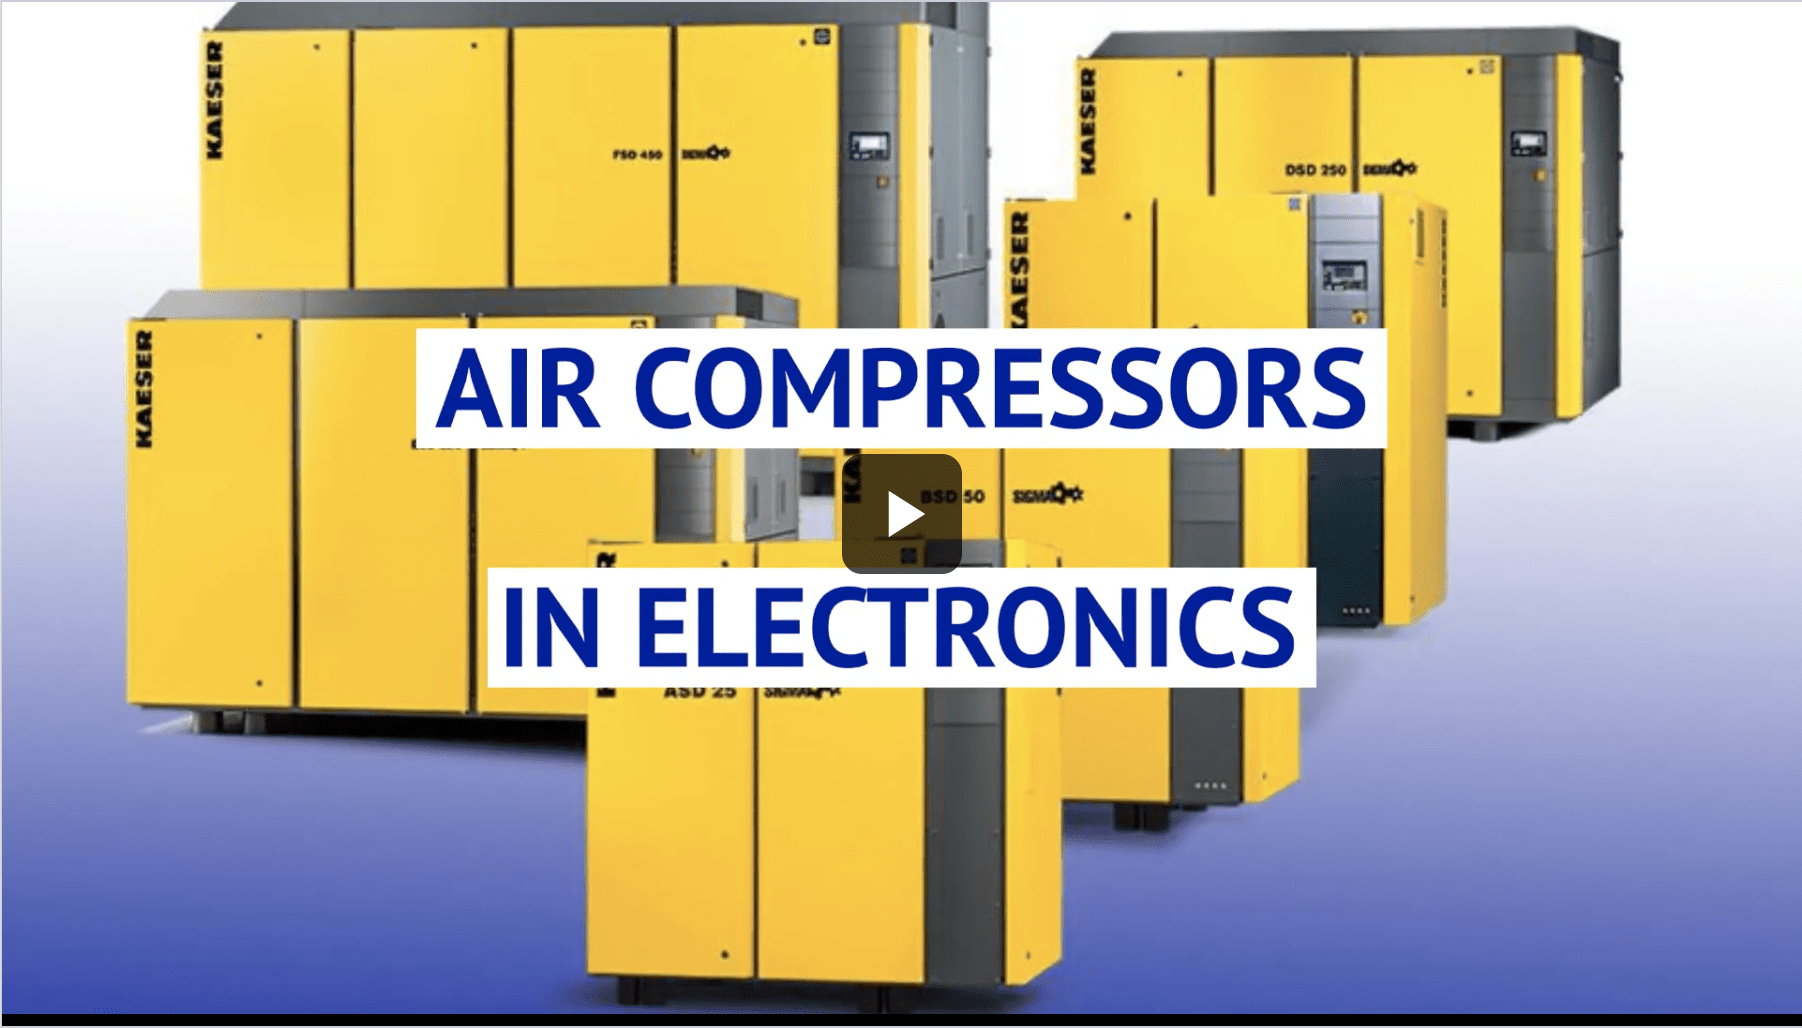 Air Compressors in Electronics